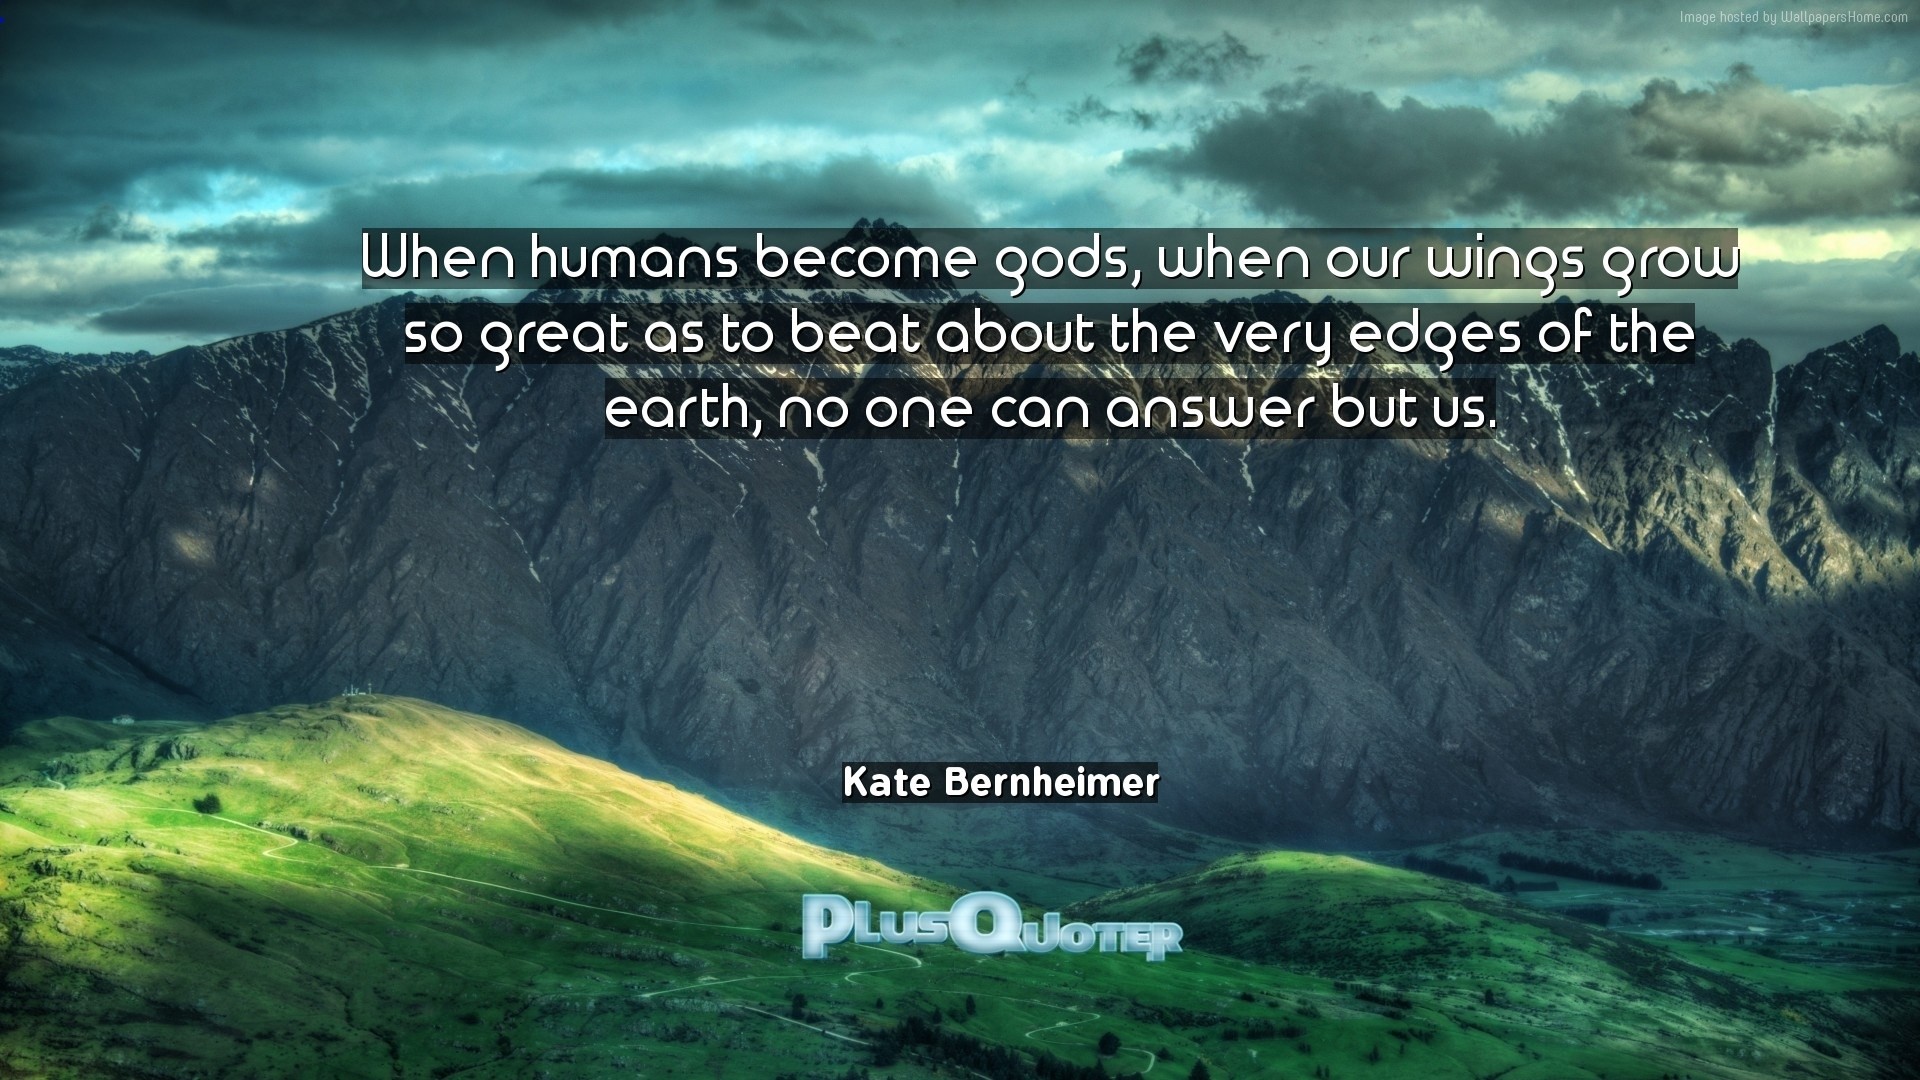 1920x1080 Download Wallpaper with inspirational Quotes- "When humans become gods,  when our wings grow